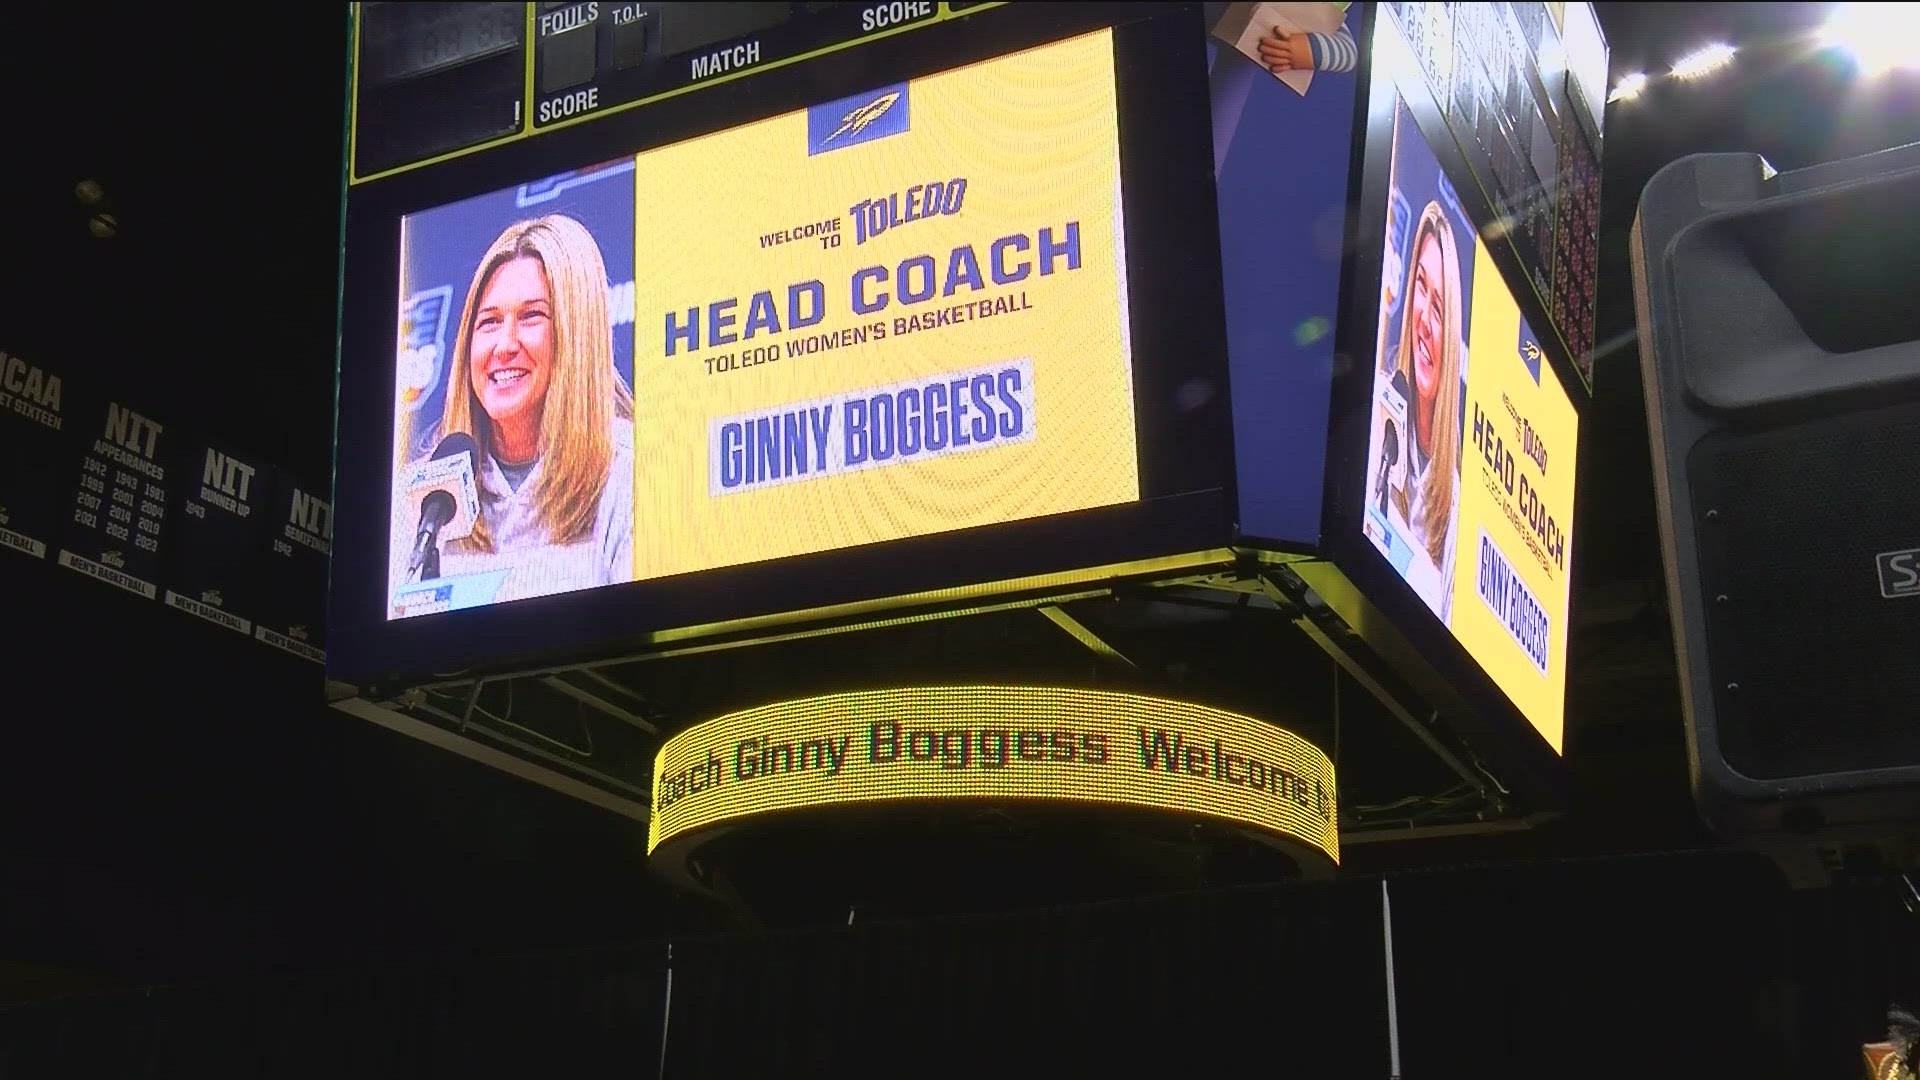 Ginny Boggess takes over the Toledo women's basketball program after three seasons as the head coach at Monmouth University.